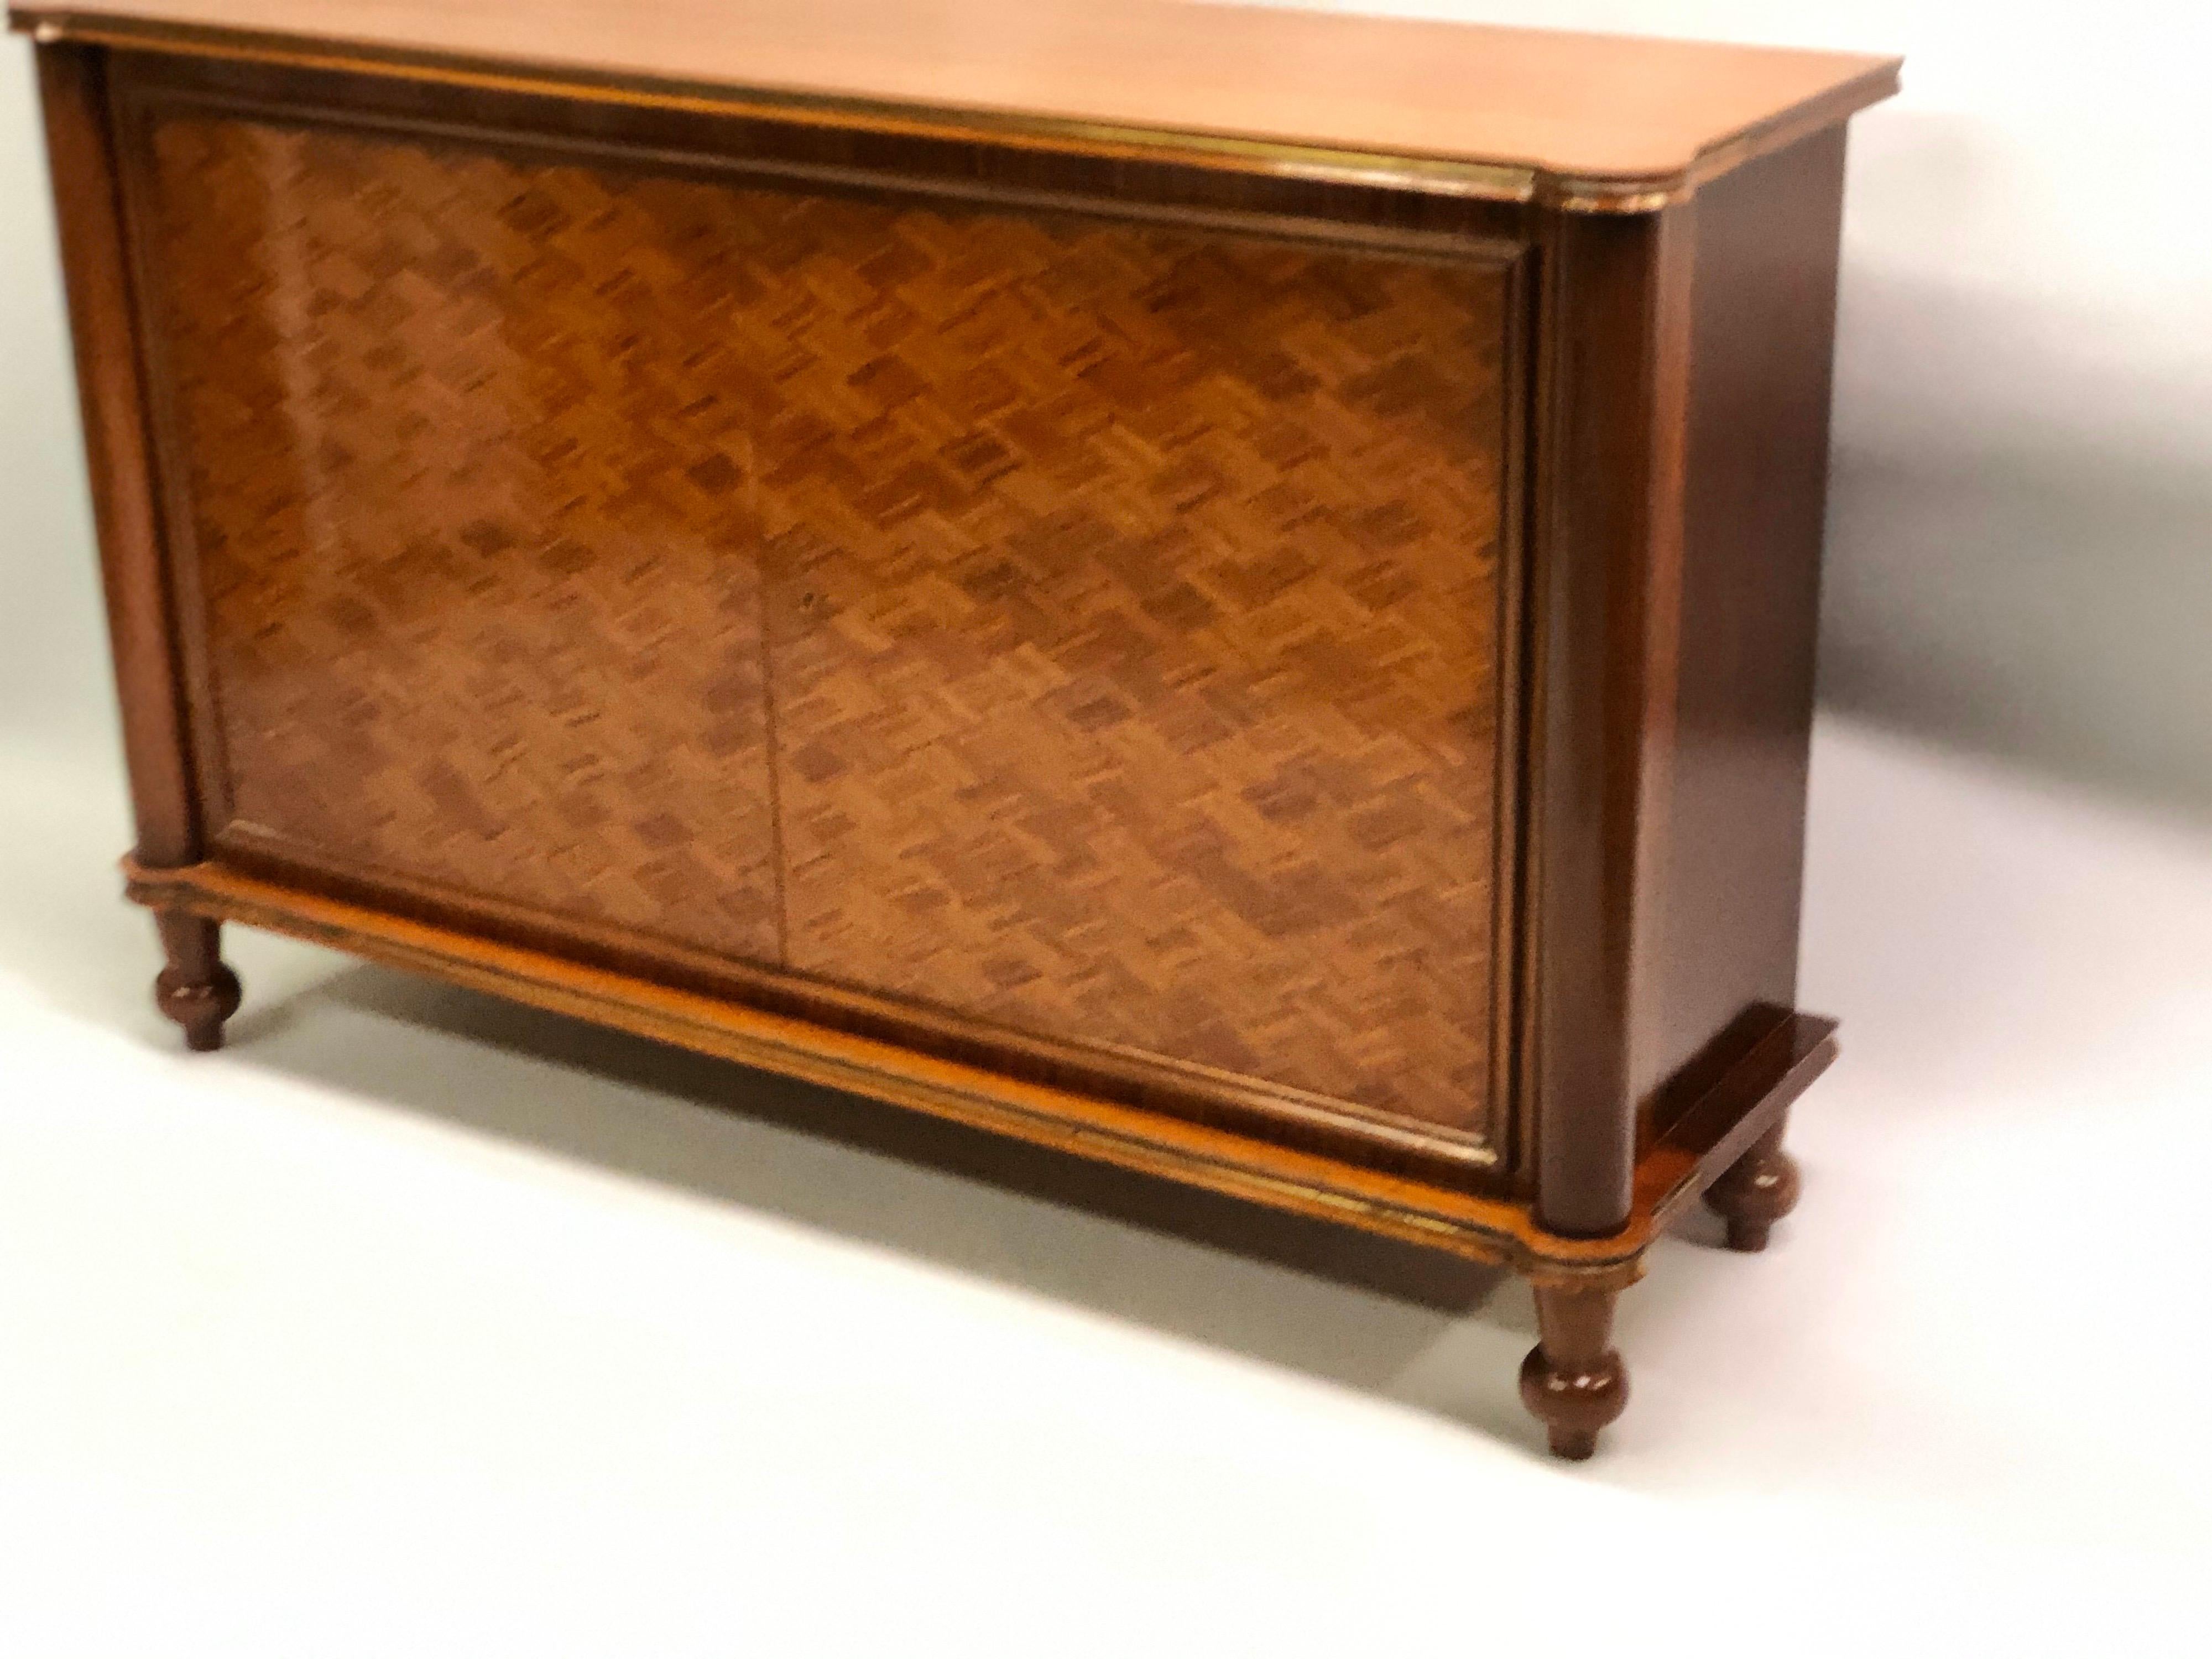 Elegant French late Art Deco / modern neoclassical sideboard / buffet by Jules Leleu,

A 2-door cabinet composed in mahogany with the doors in a herringbone wood inlay and inset brass details along the upper and lower borders of the entire piece.